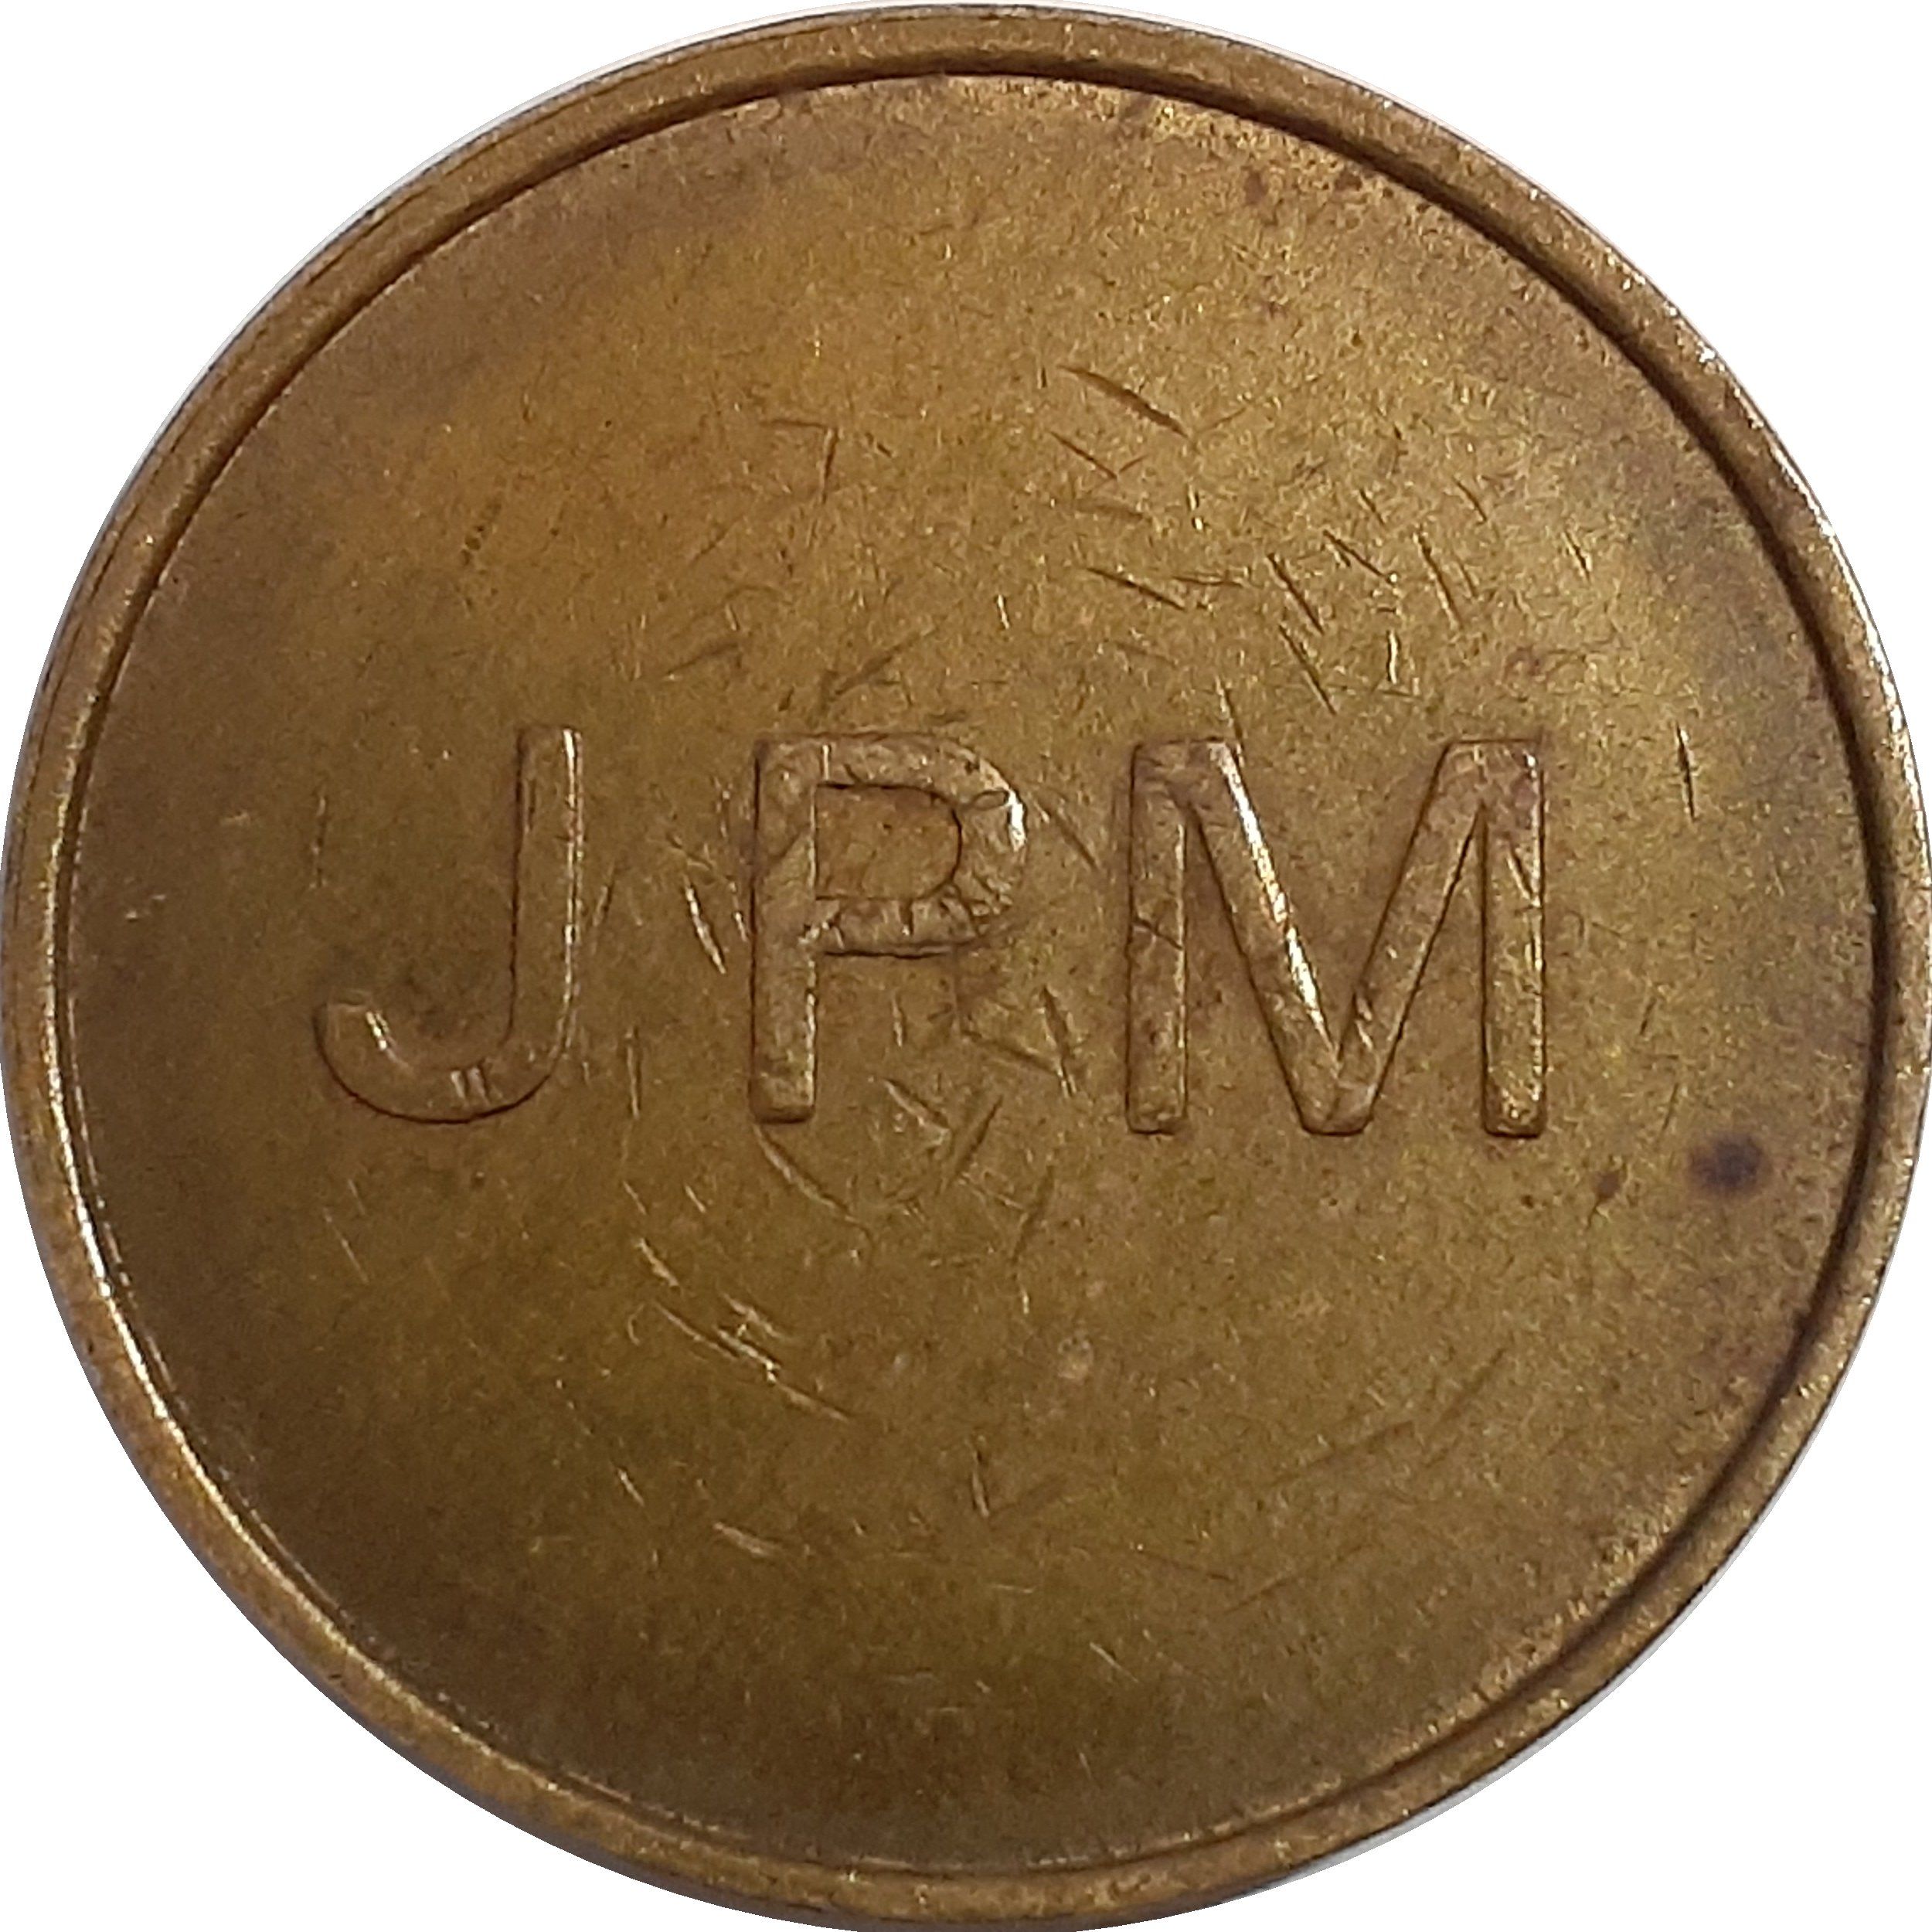 Jpm Coin - CoinDesk